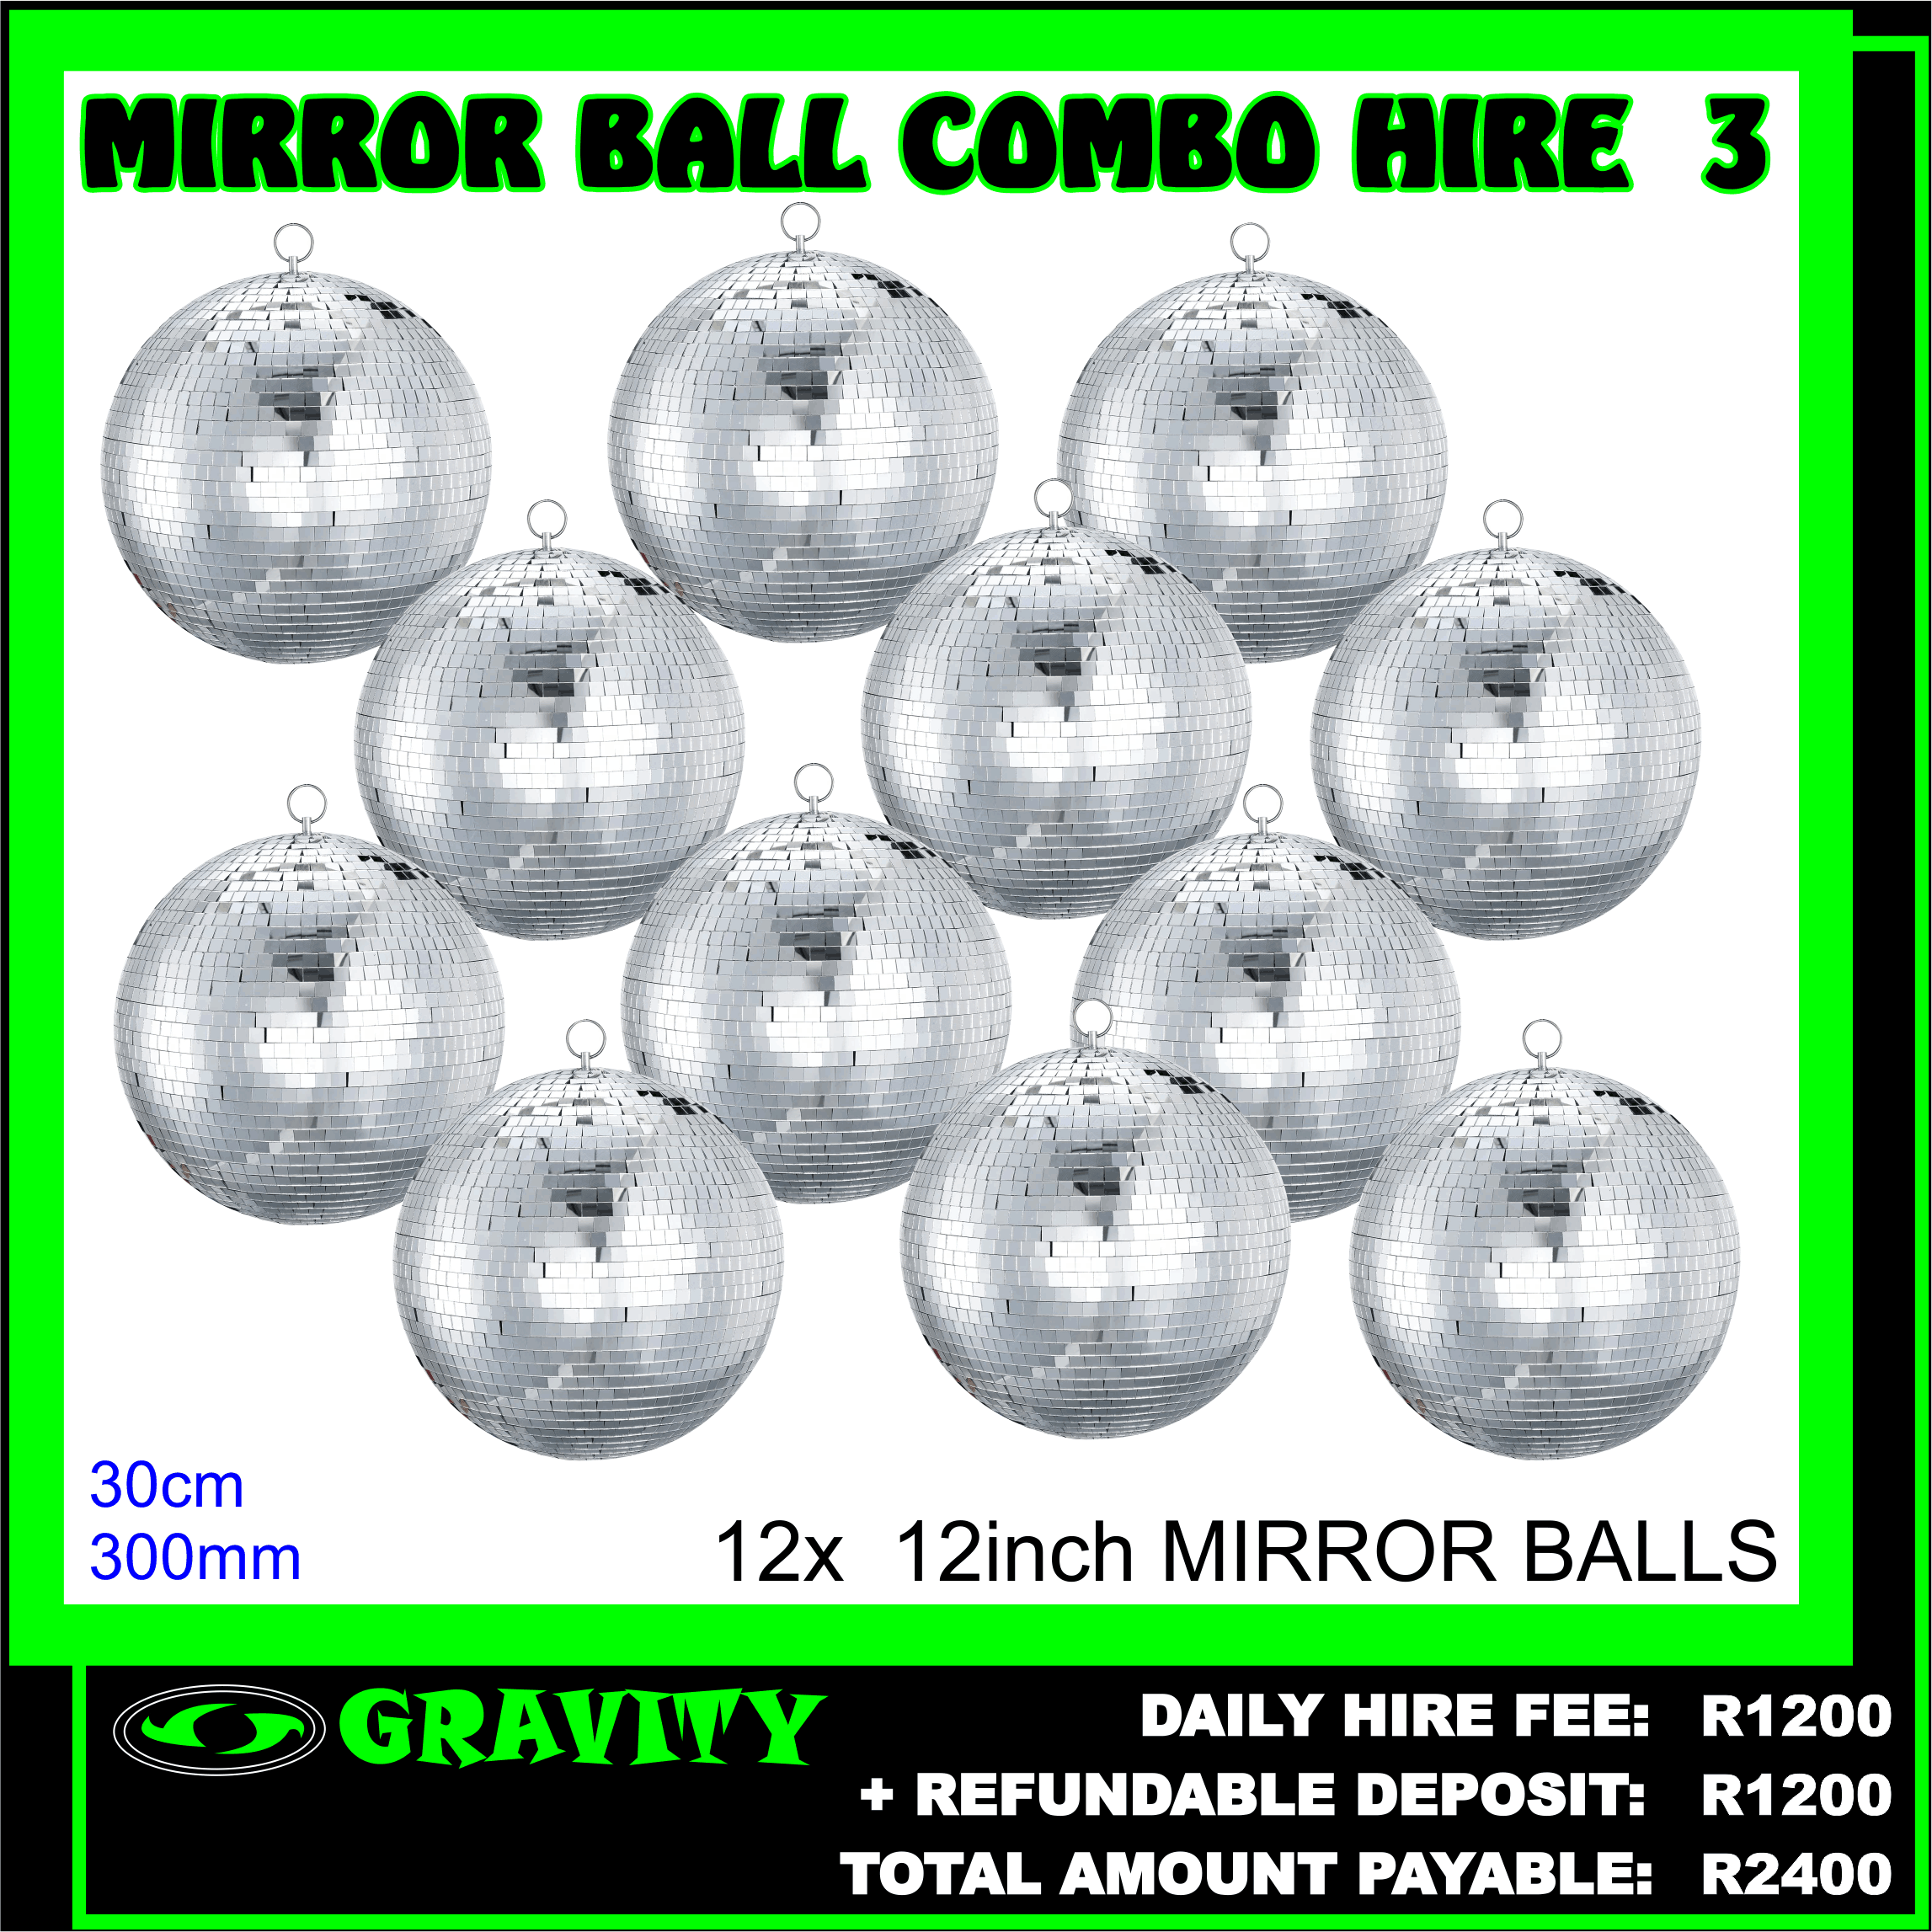  mirror balls - Prodecor Function Decorators - Show Category MIRROR BALL HIRE DURBAN , 80s THEME PARTY MIRROR BALL HIRE DURBAN .  Home Disco Effects Hire For Party or Event - Joy Jukes  Mirror Ball Hire | Mirror Ball, Motor, Pin Spot and Stand ...https://cal-x.co.za › product › mirror-ball-hire Mirror ball hire from CAL-X Rentals. The mirror ball is a classic lighting accessory. Our rental kit includes everything you need. It comes with a 30cm mirror ... 